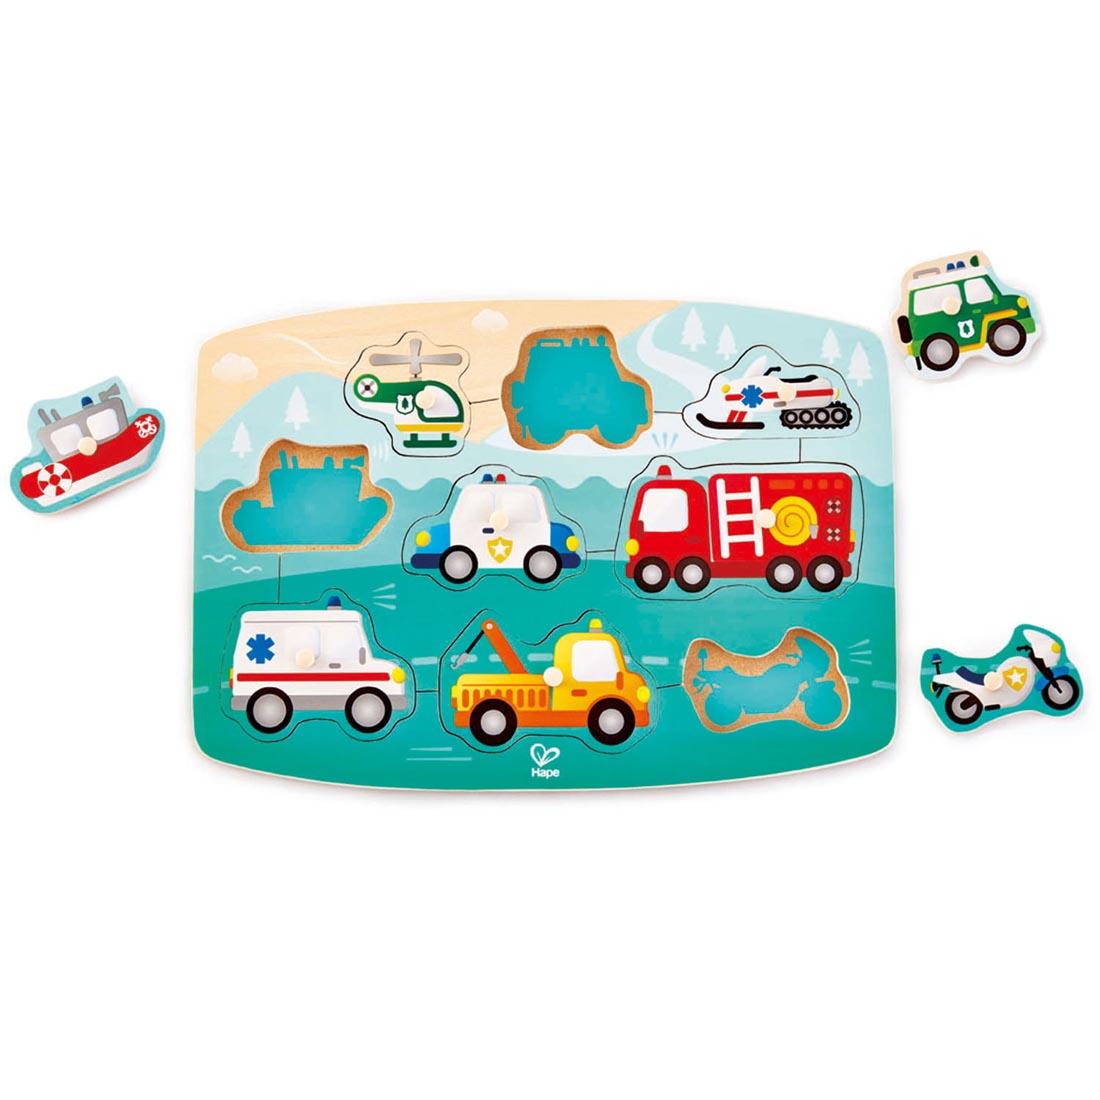 9-Piece Emergency Peg Puzzle By Hape with three of the pieces off to the side